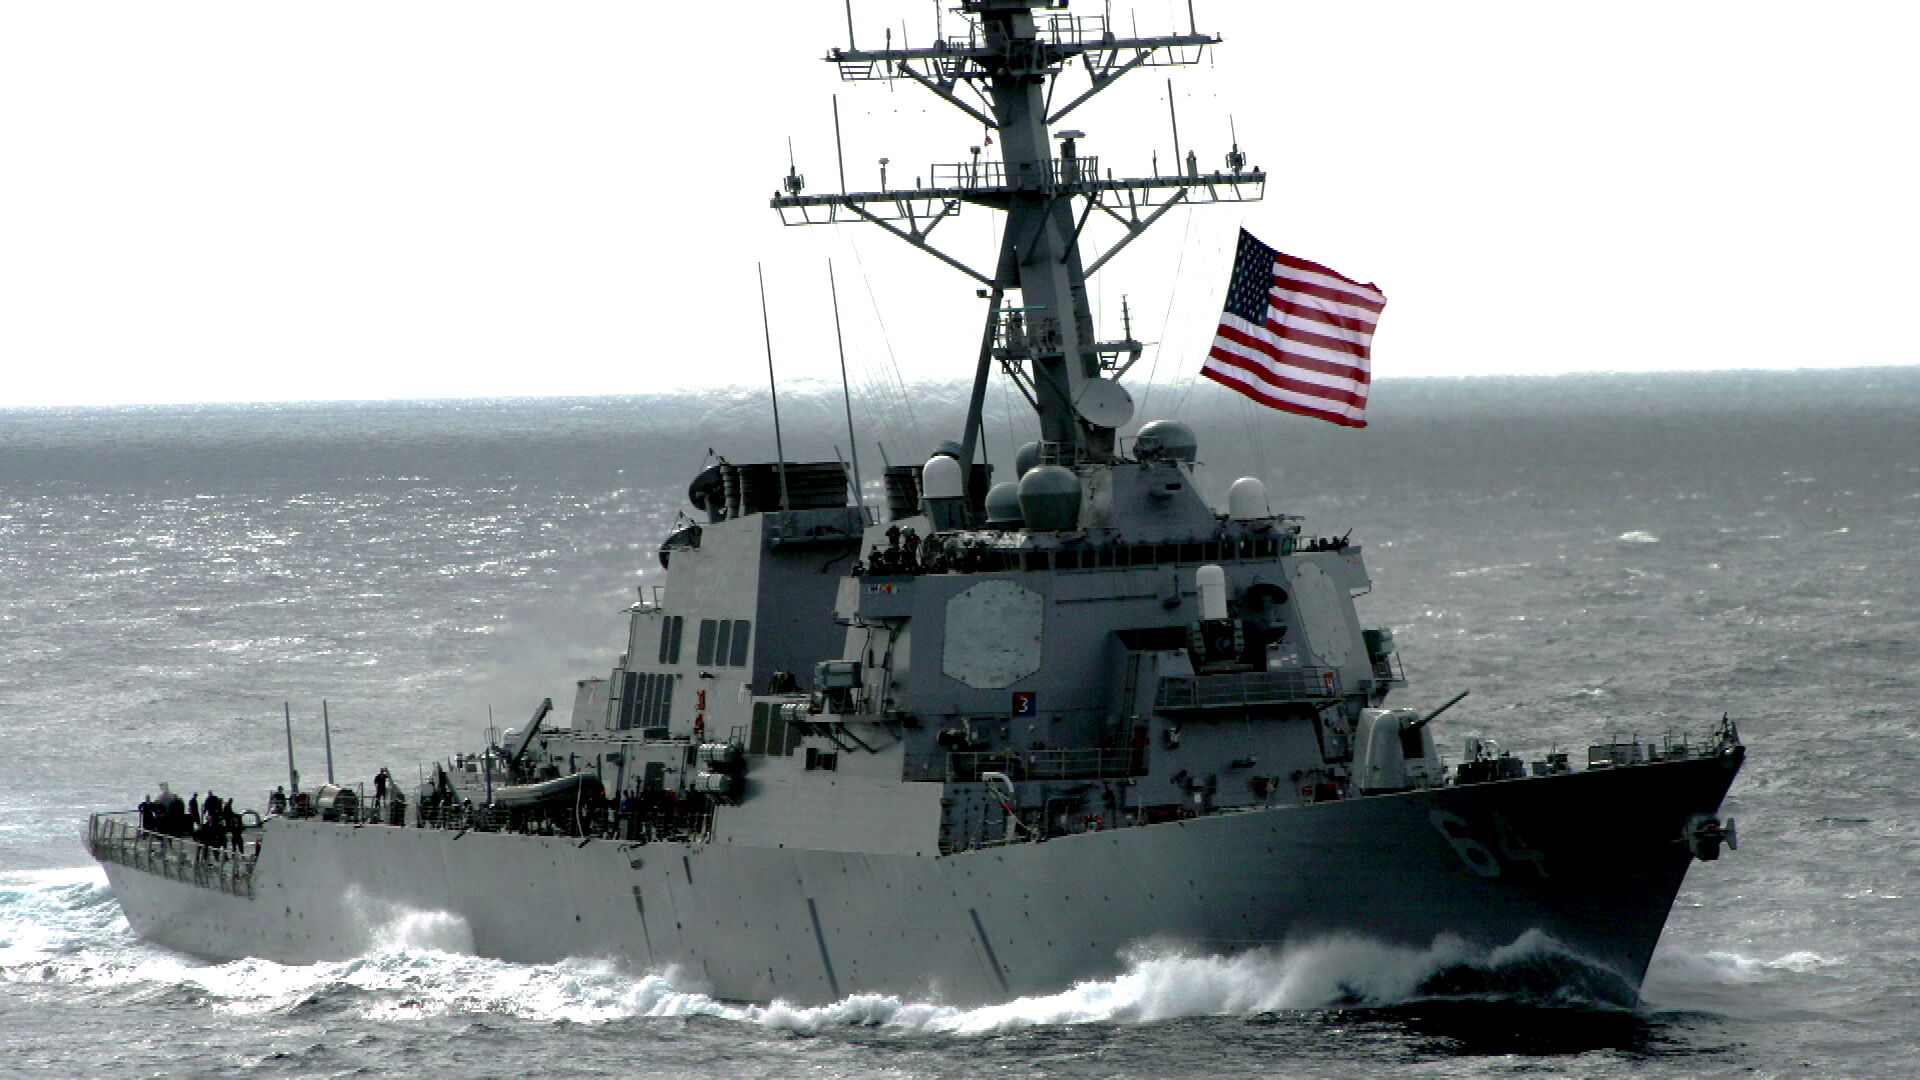 Pentagon says US warship attacked in Red Sea